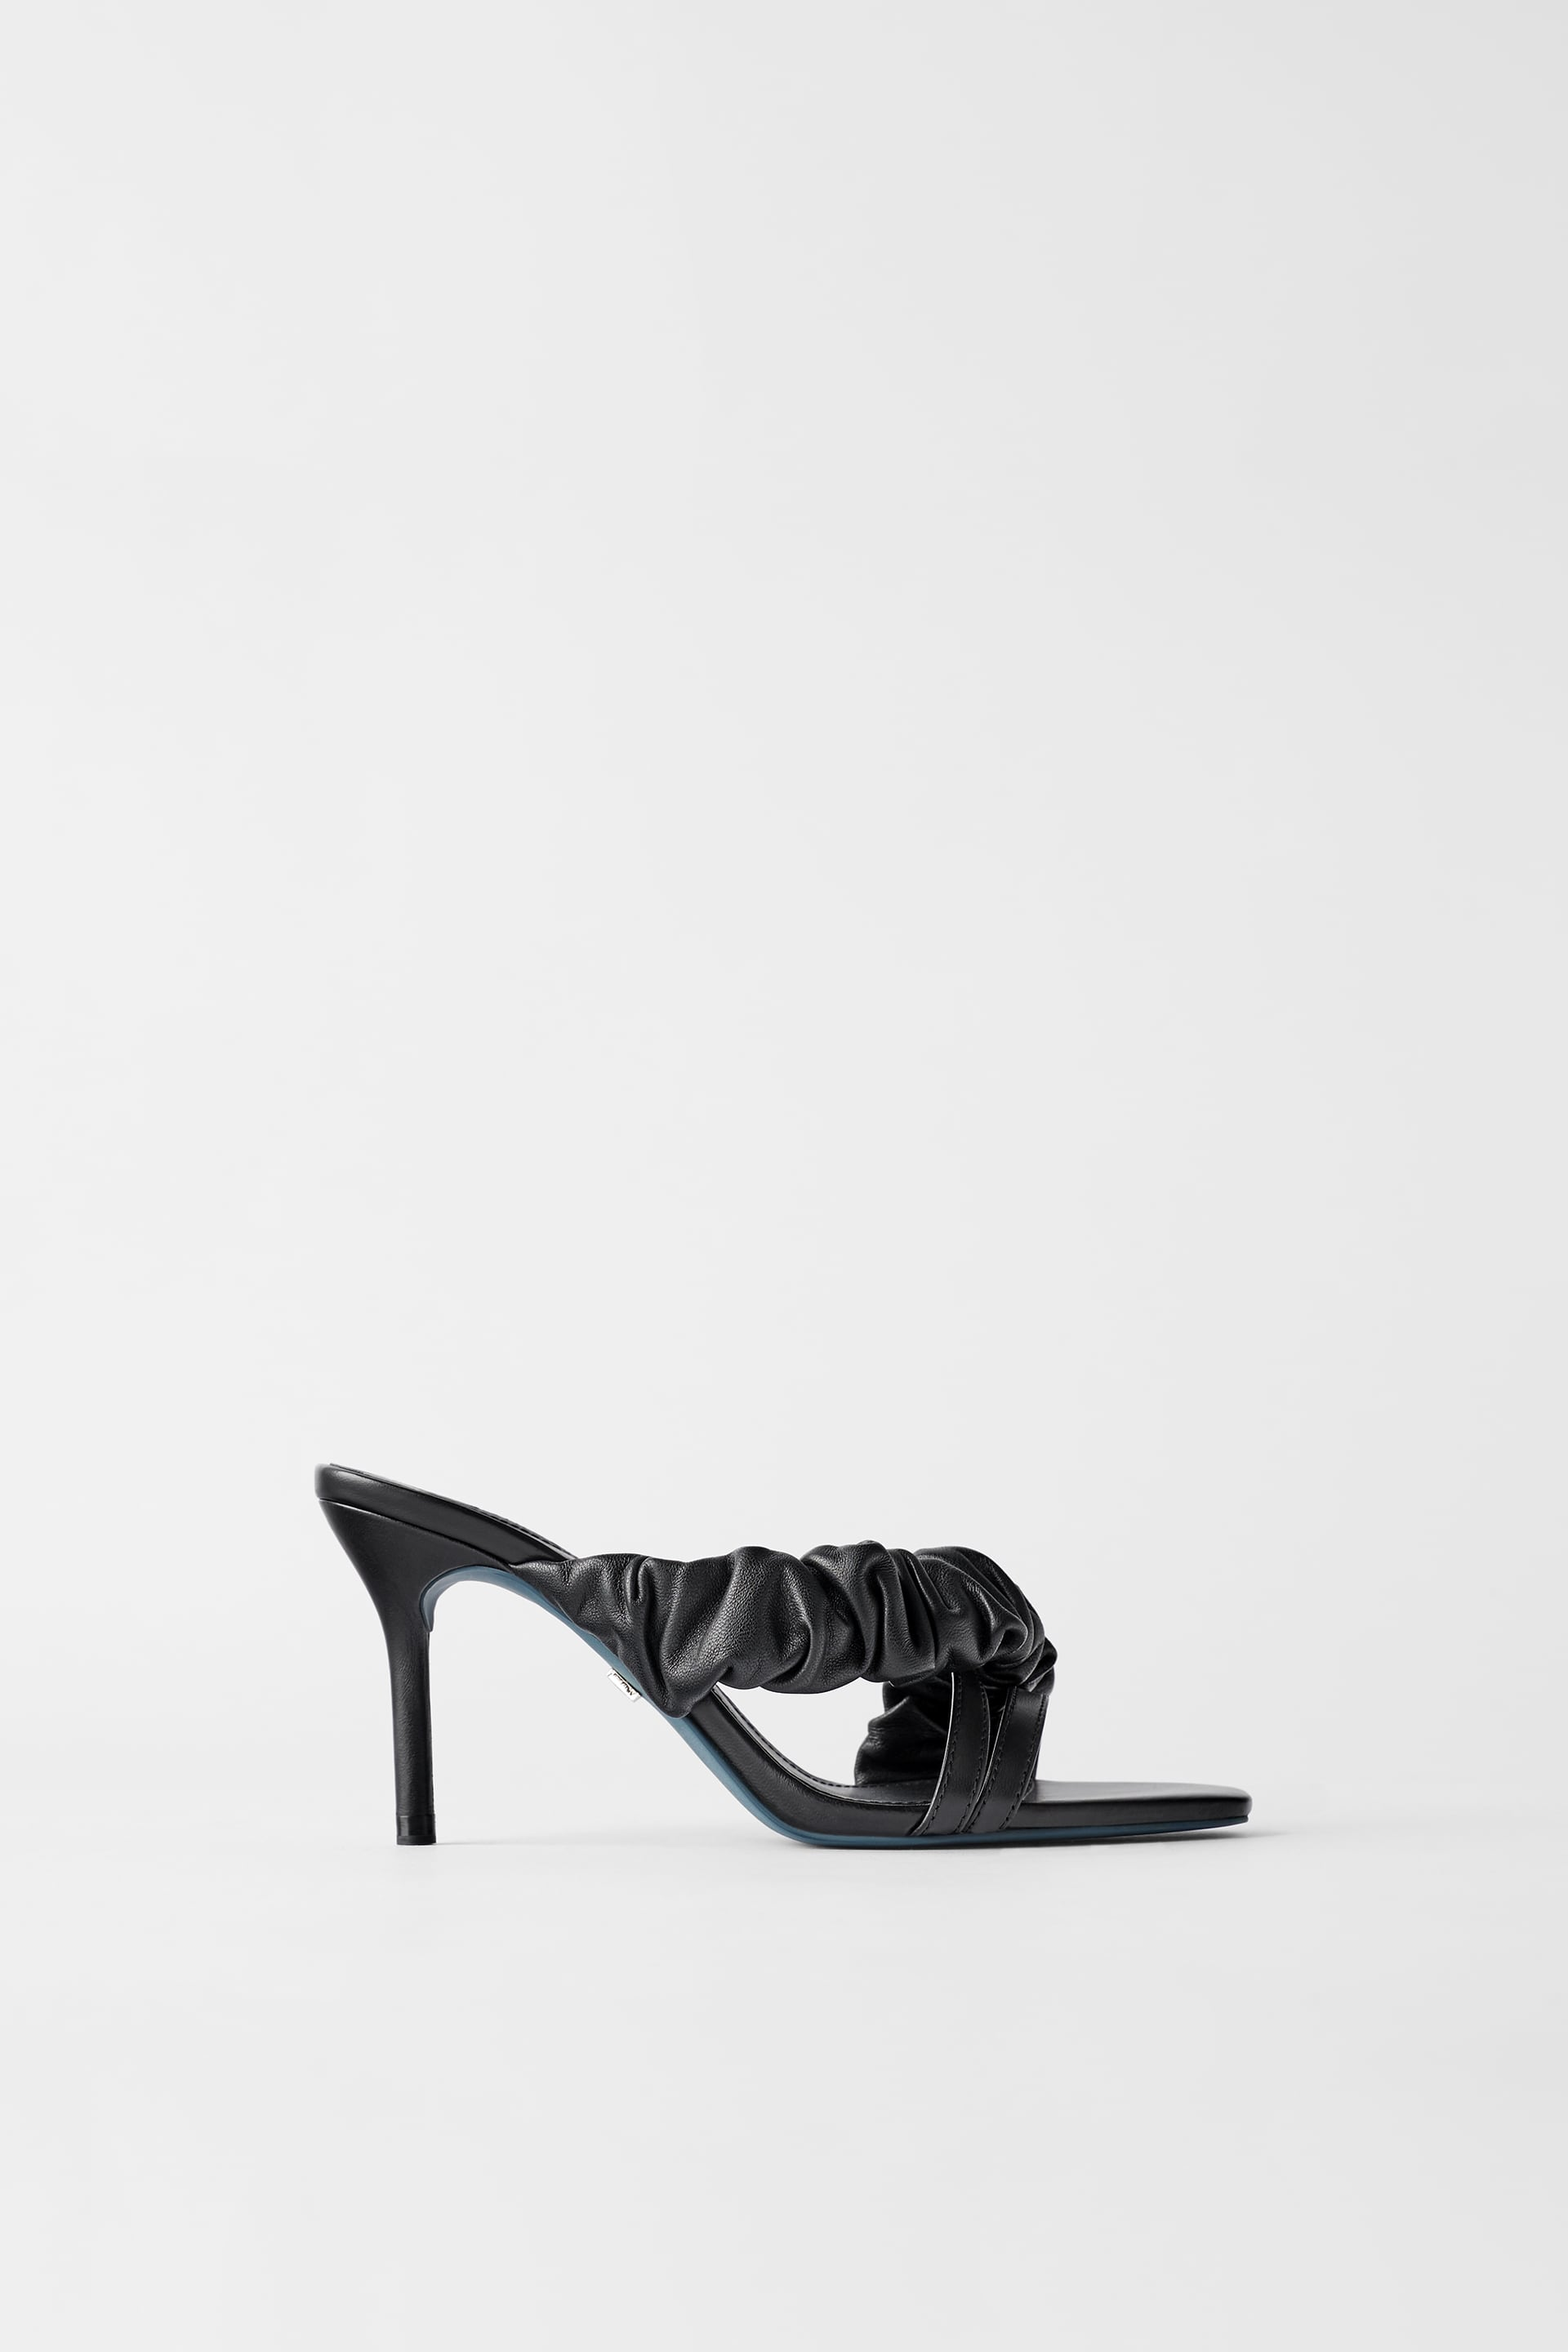 Zara + Leather High Heeled Ruffly Blue Collection Sandals